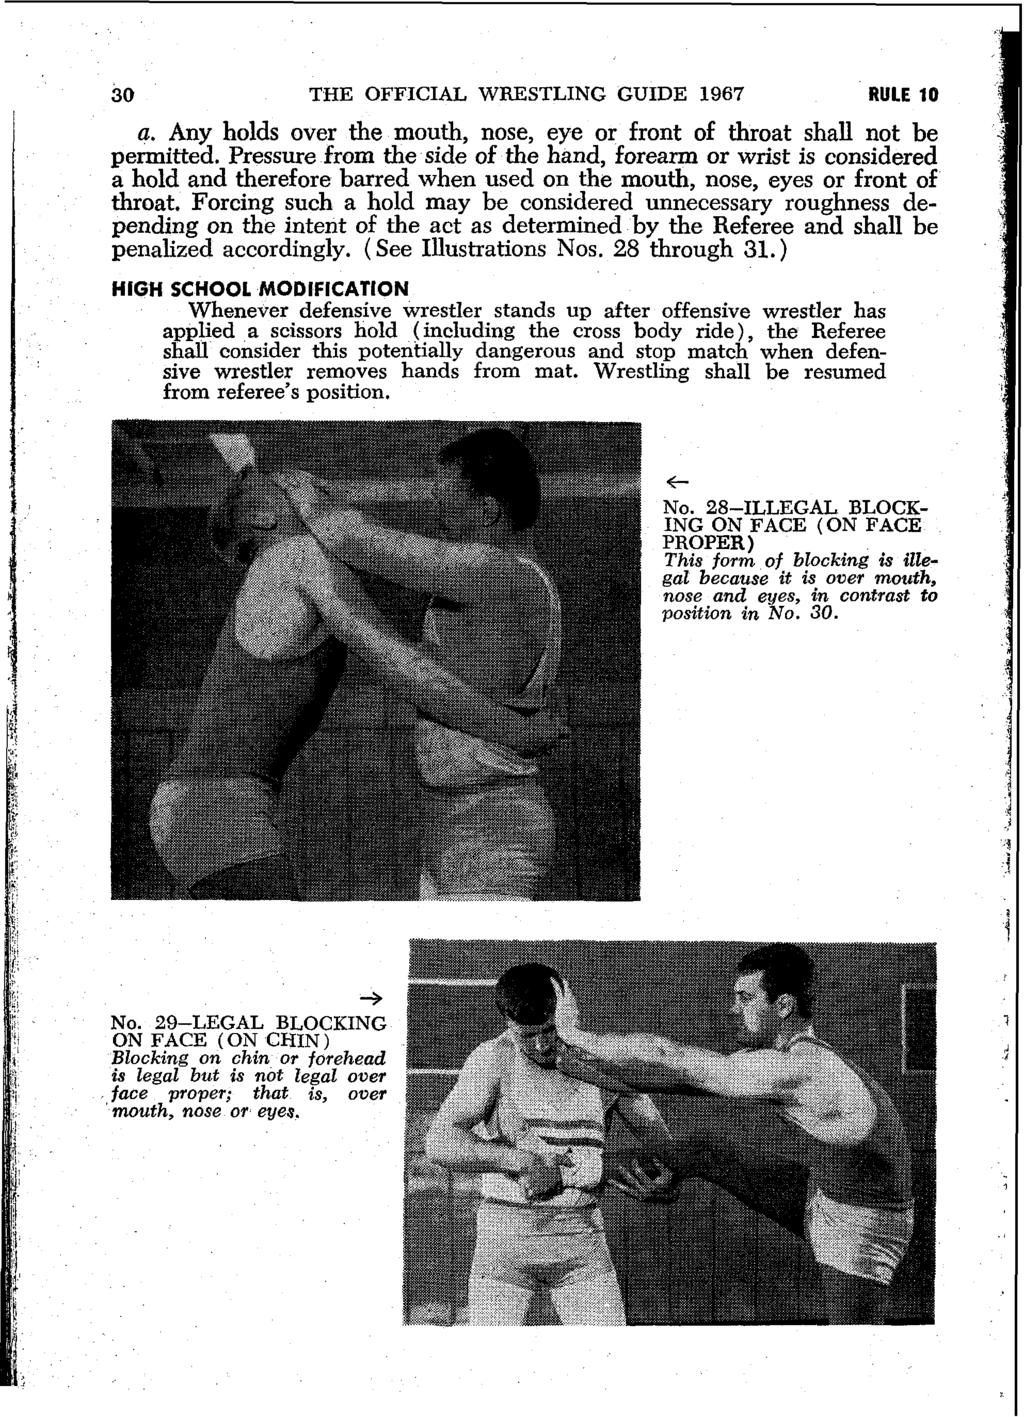 30 THE OFFICIAL WRESTLING GUIDE 1967 RULE 10 a. Any holds over the mouth, nose, eye or front of throat shall not be permitted.